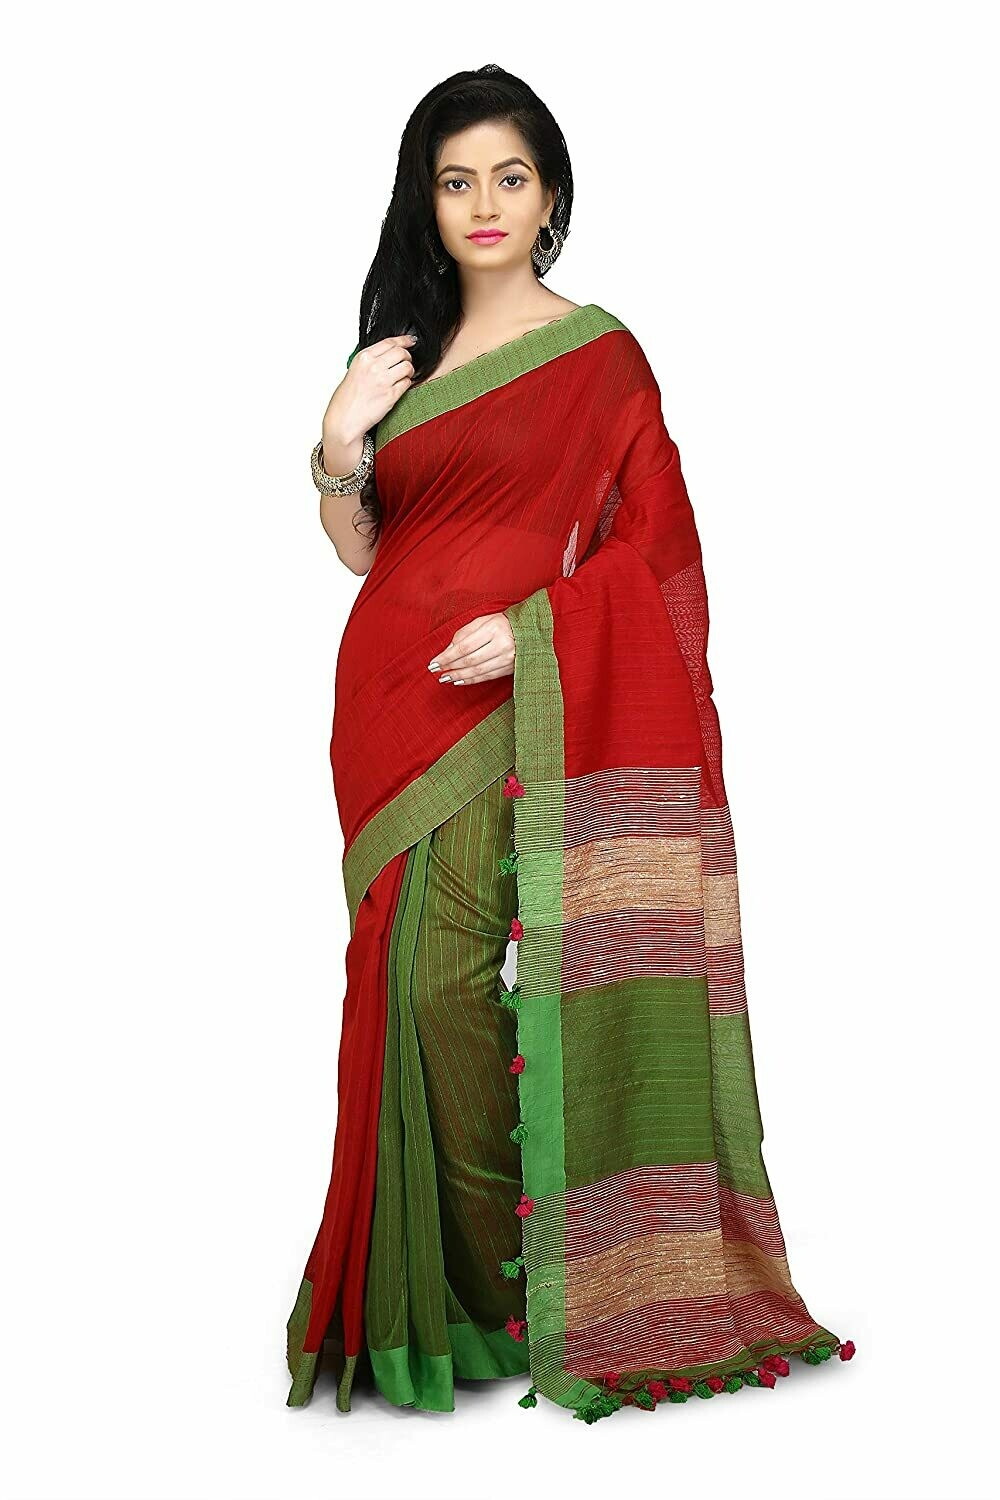 Misha Boutique Women's Red and Green Cotton Saree With Blouse Piece